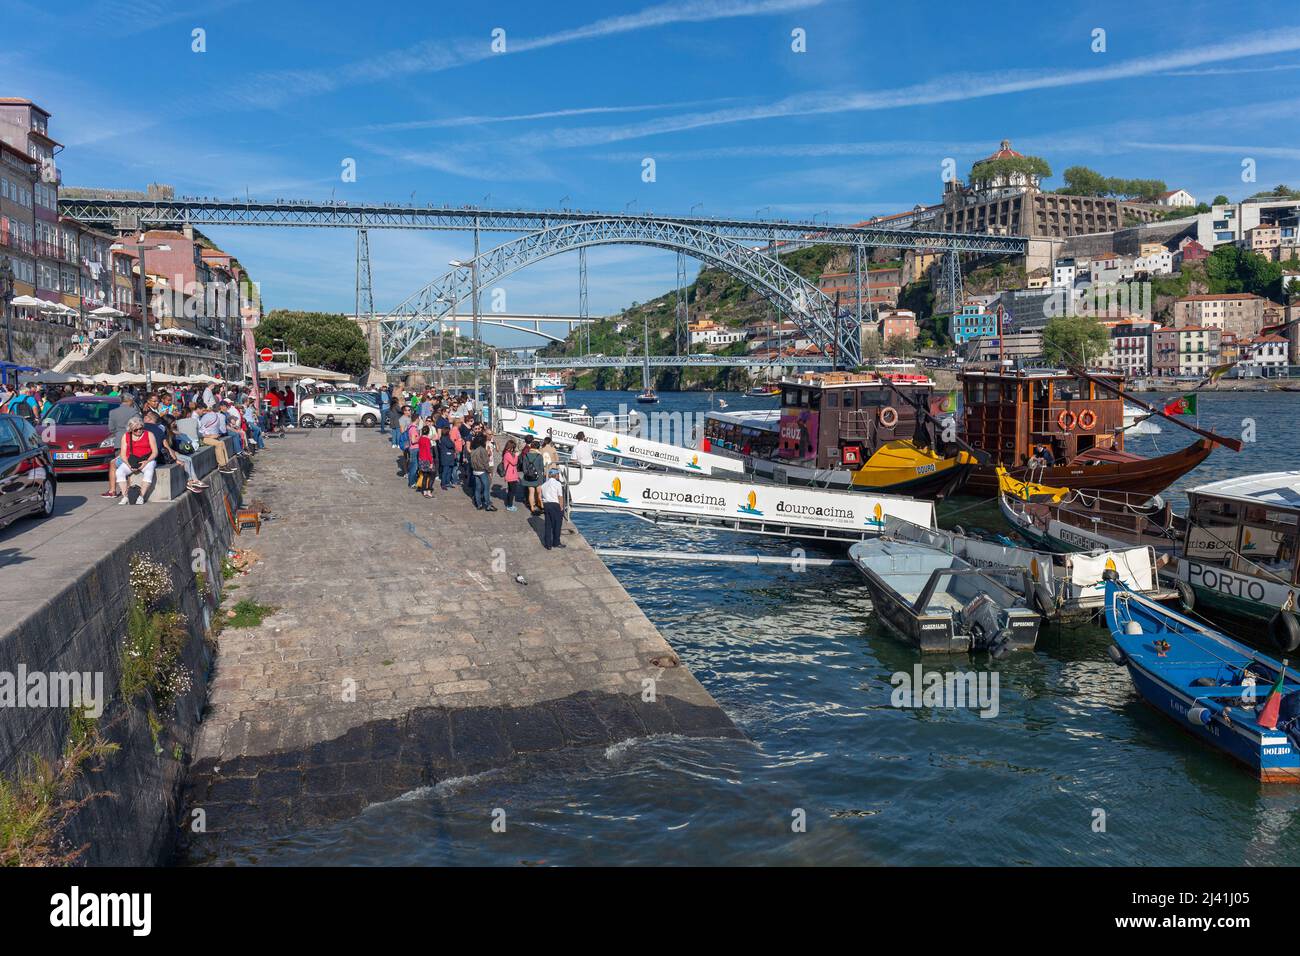 The Ribeira District showing the Promenade with Moored Pleasure Boats beside the Douro River, Porto, Portugal, Europe Stock Photo